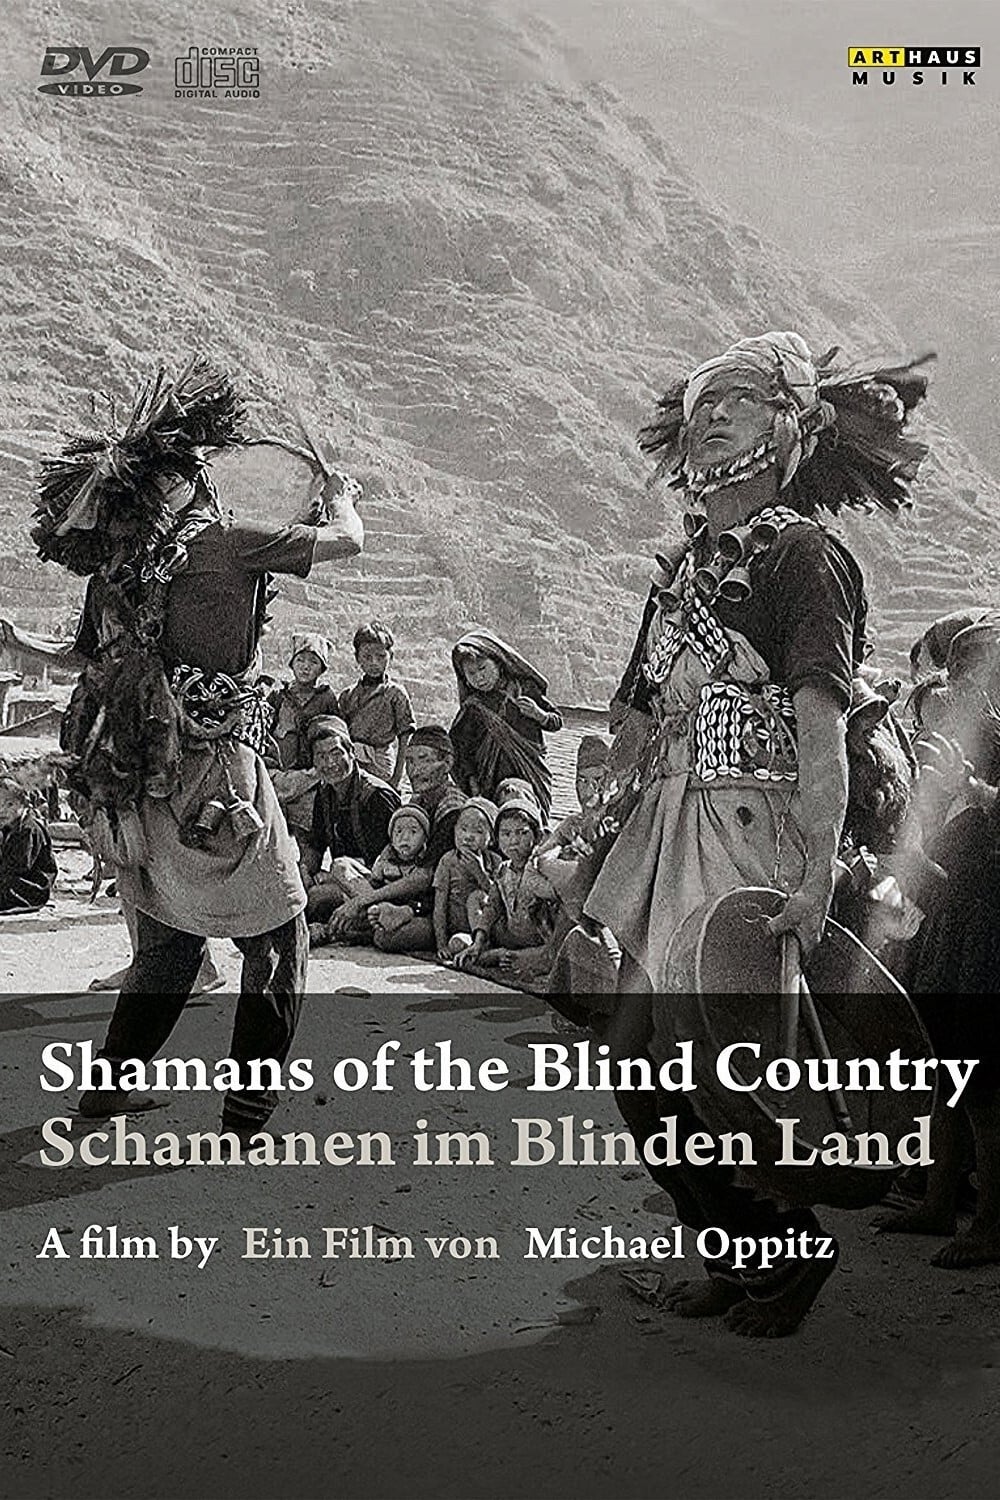 Shamans of the Blind Country (1981)